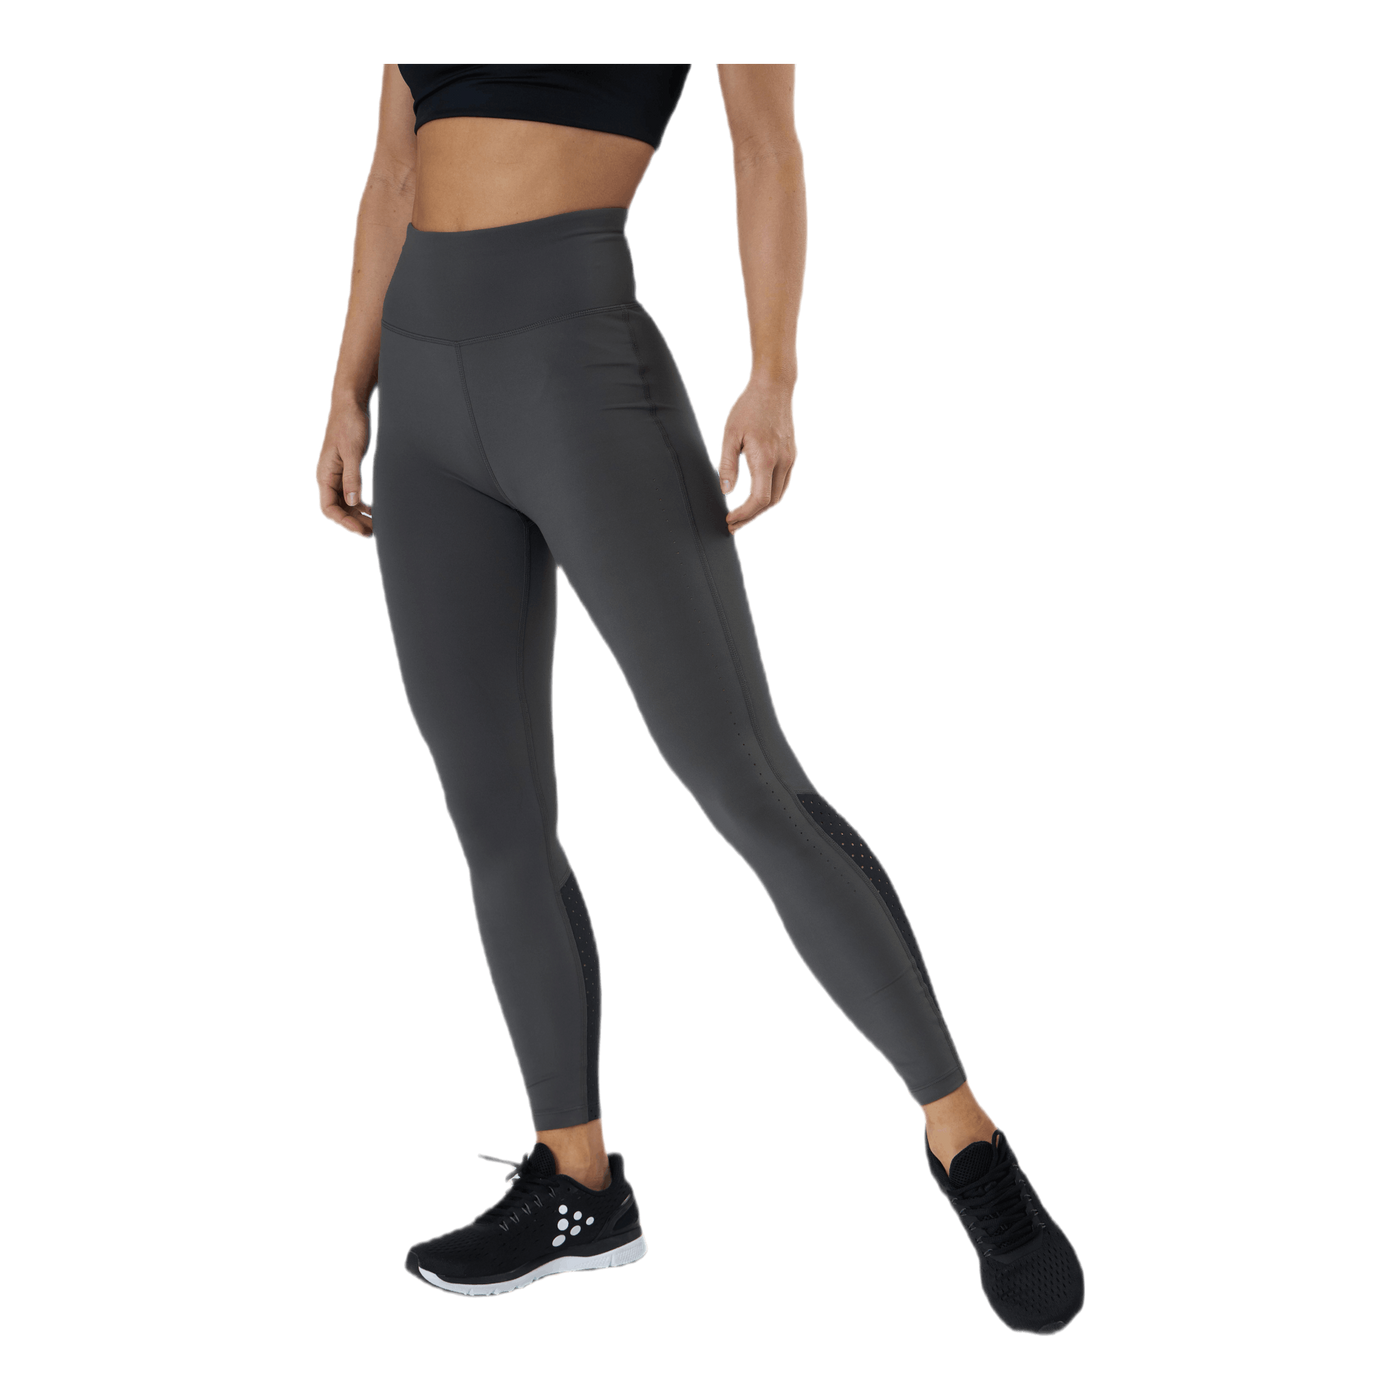 ADV Charge Perforated Tights Black/Grey